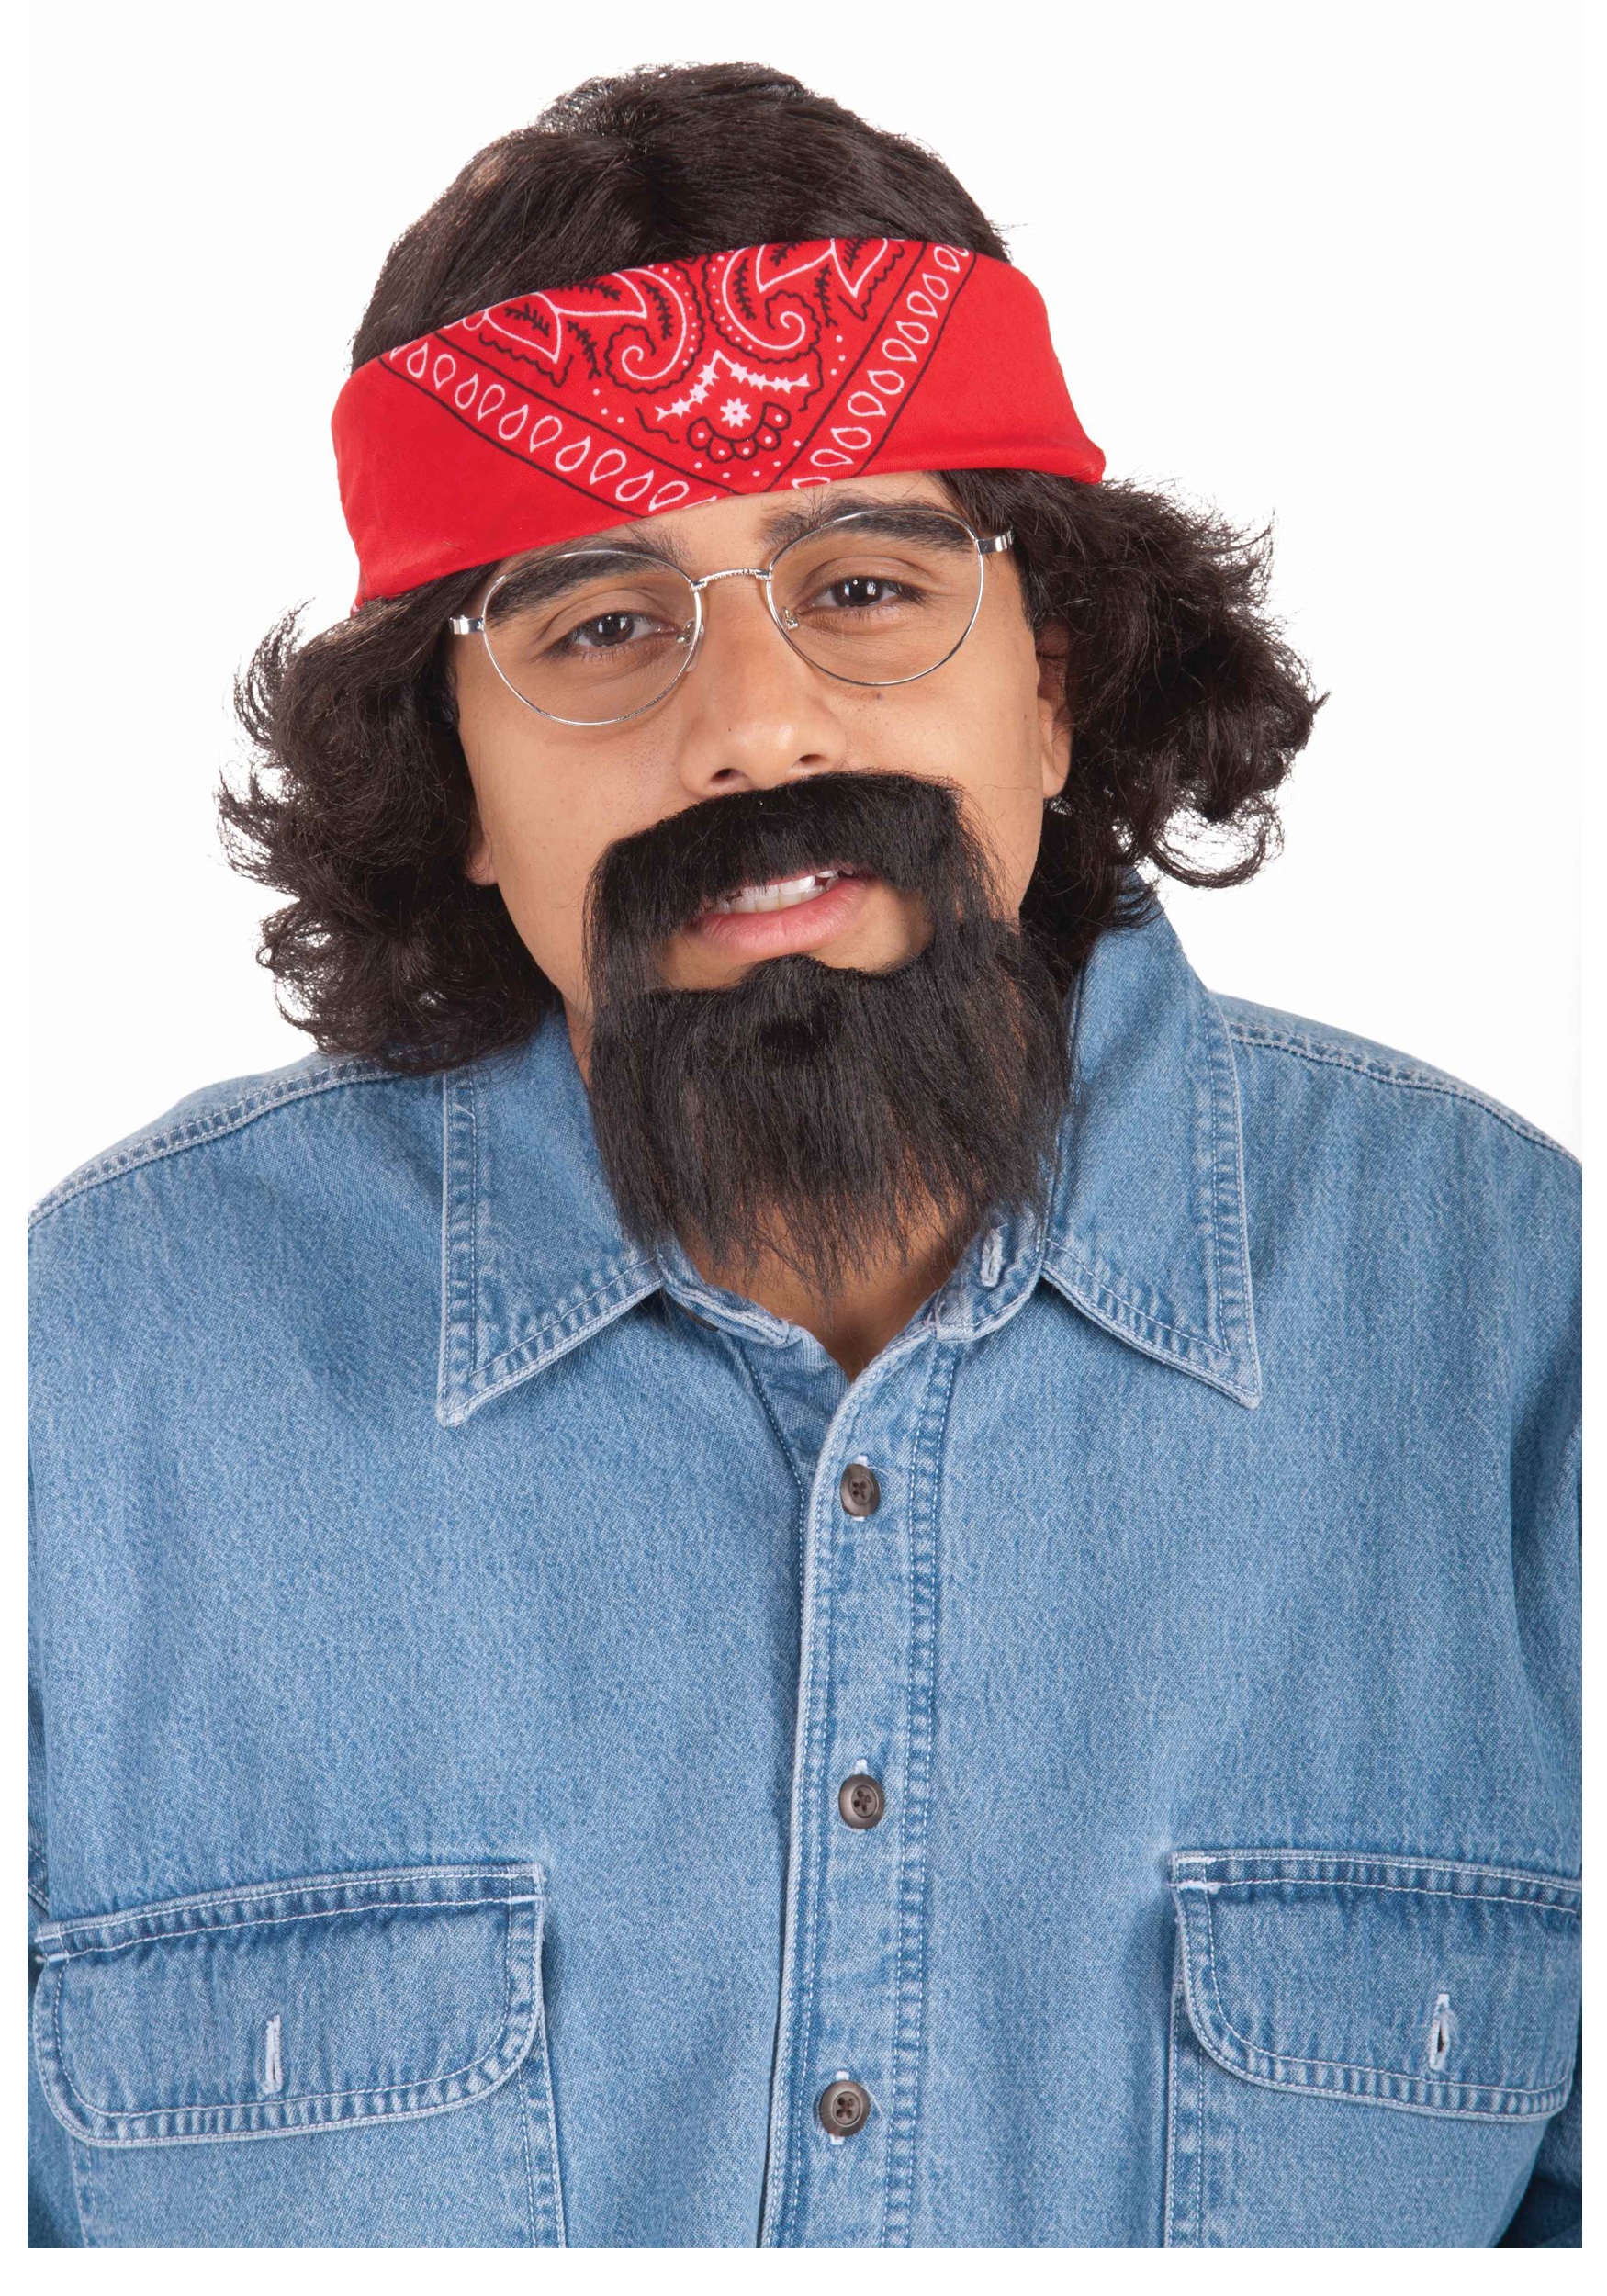 Tommy Chong Costume Kit